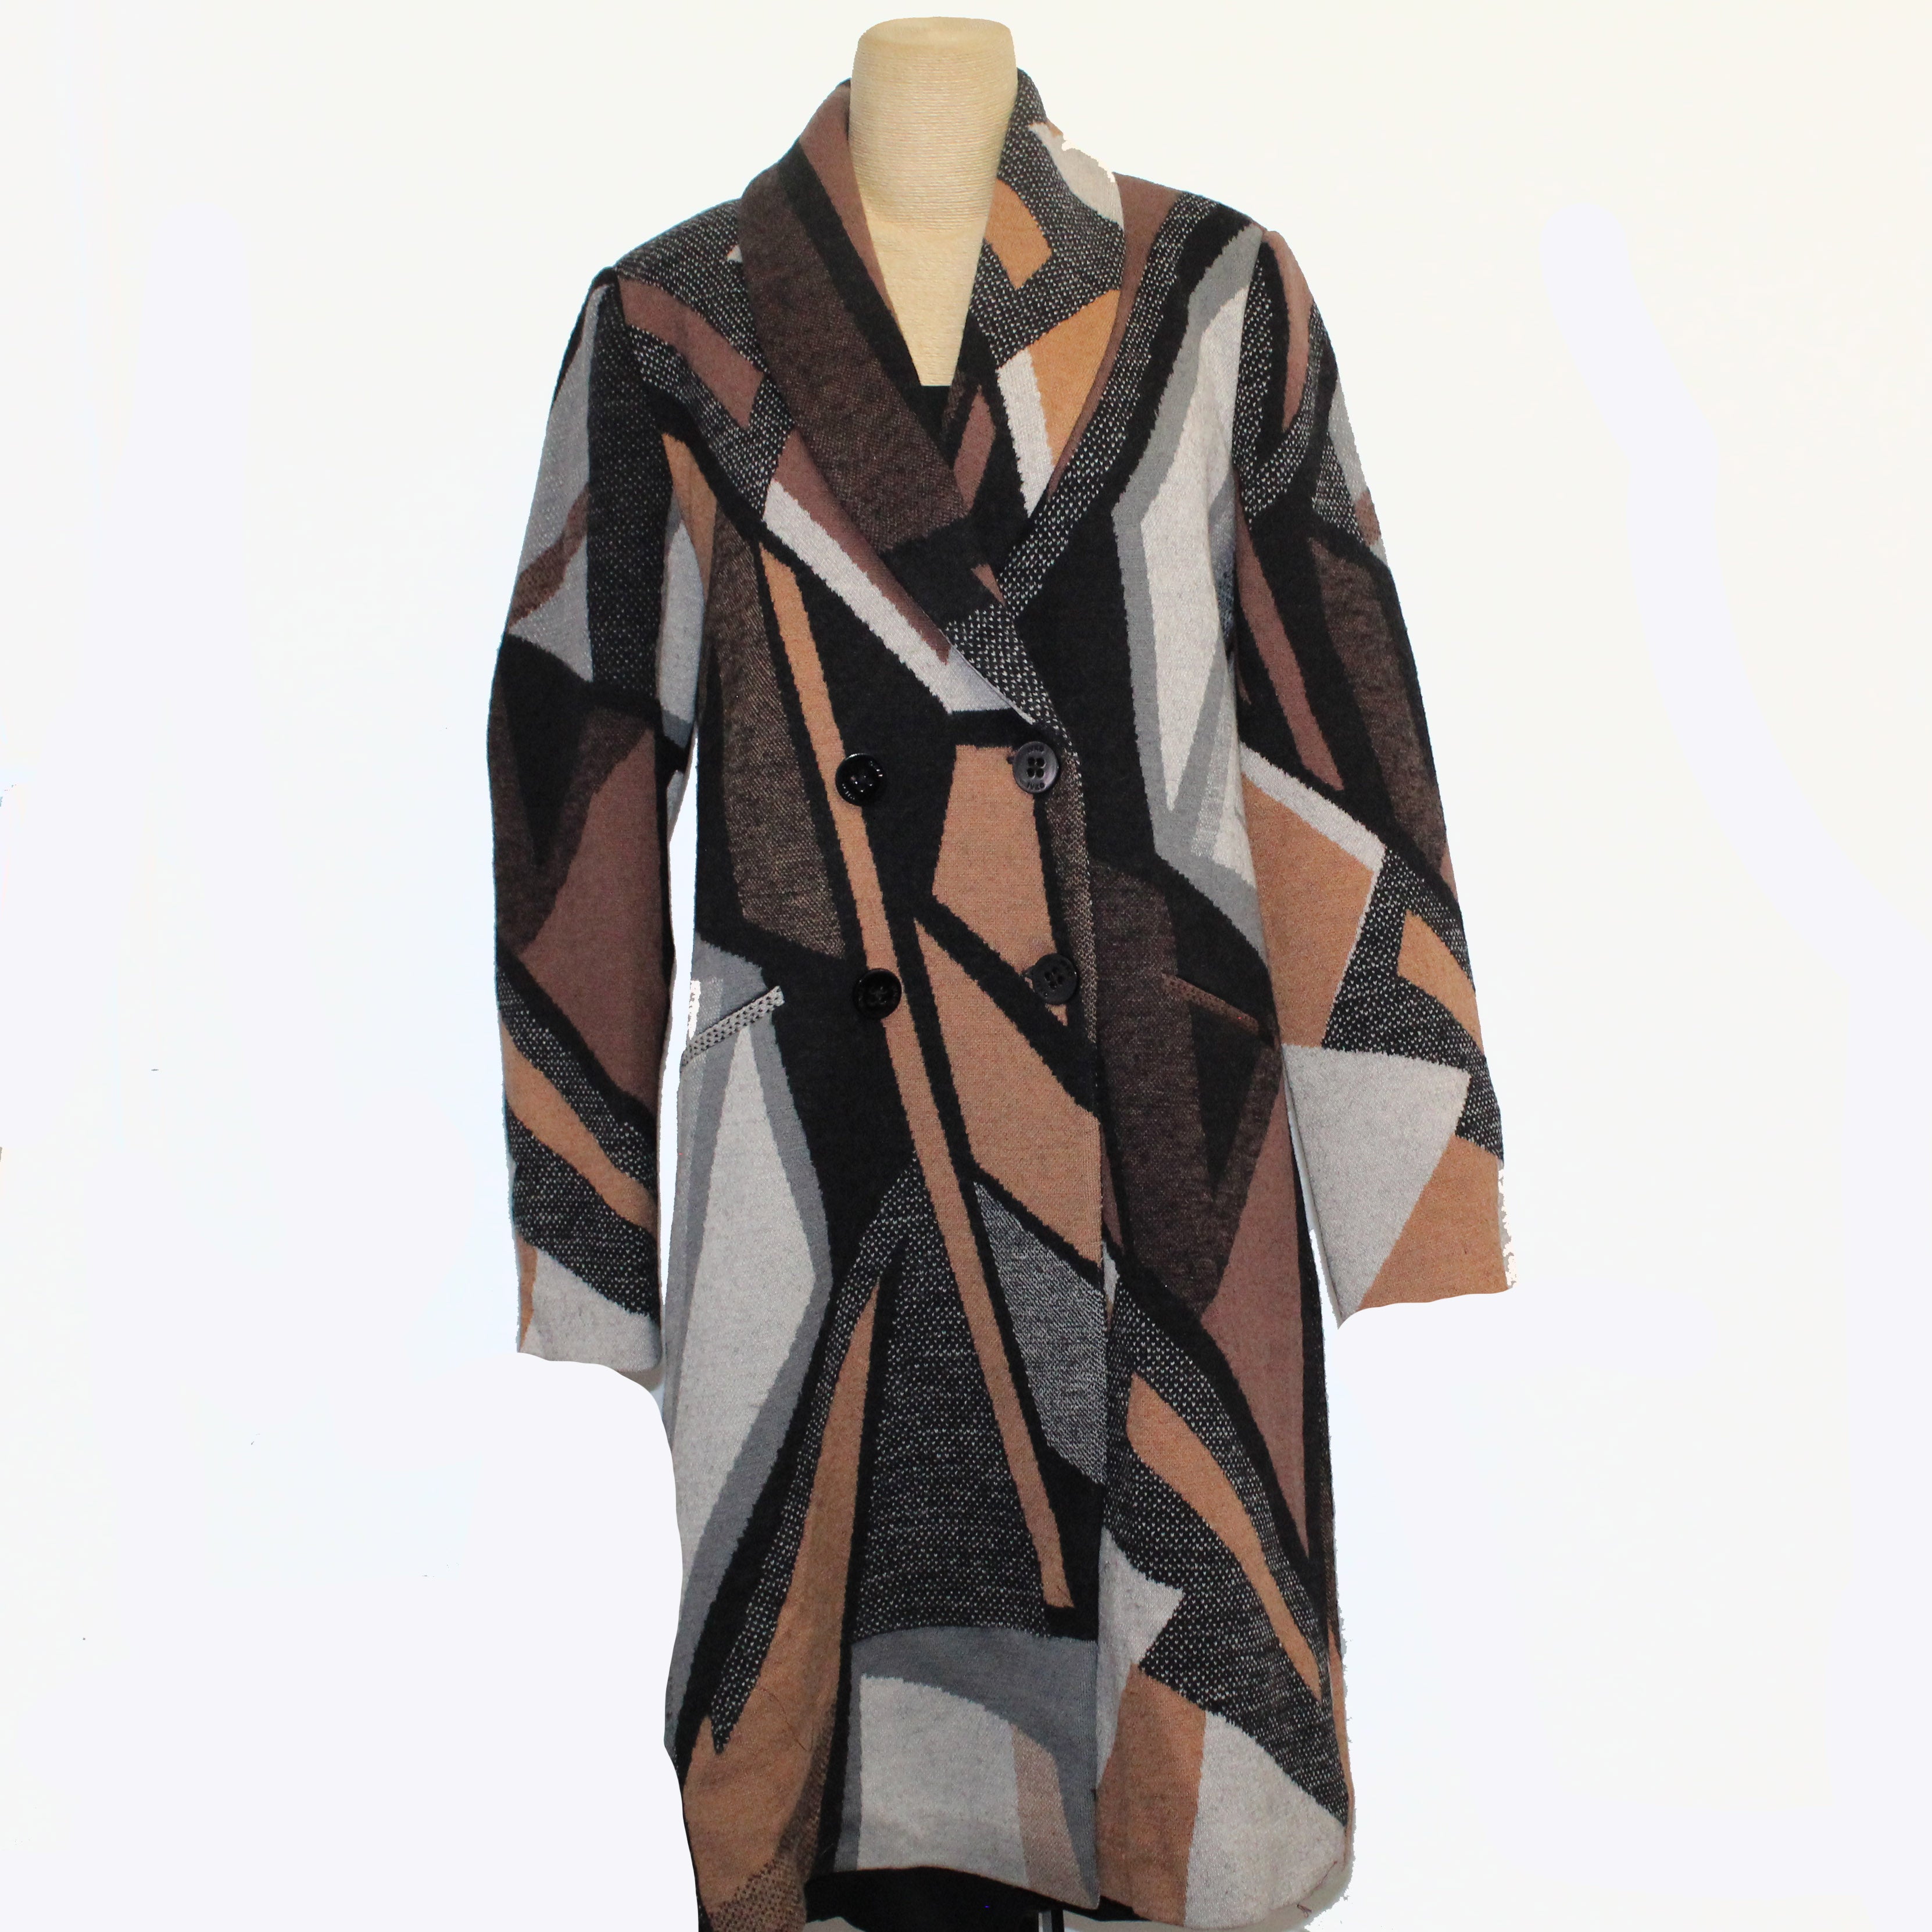 IVKO Coat, Abstract Pattern, Brown/Gold/Grey/Black/White S, M & L